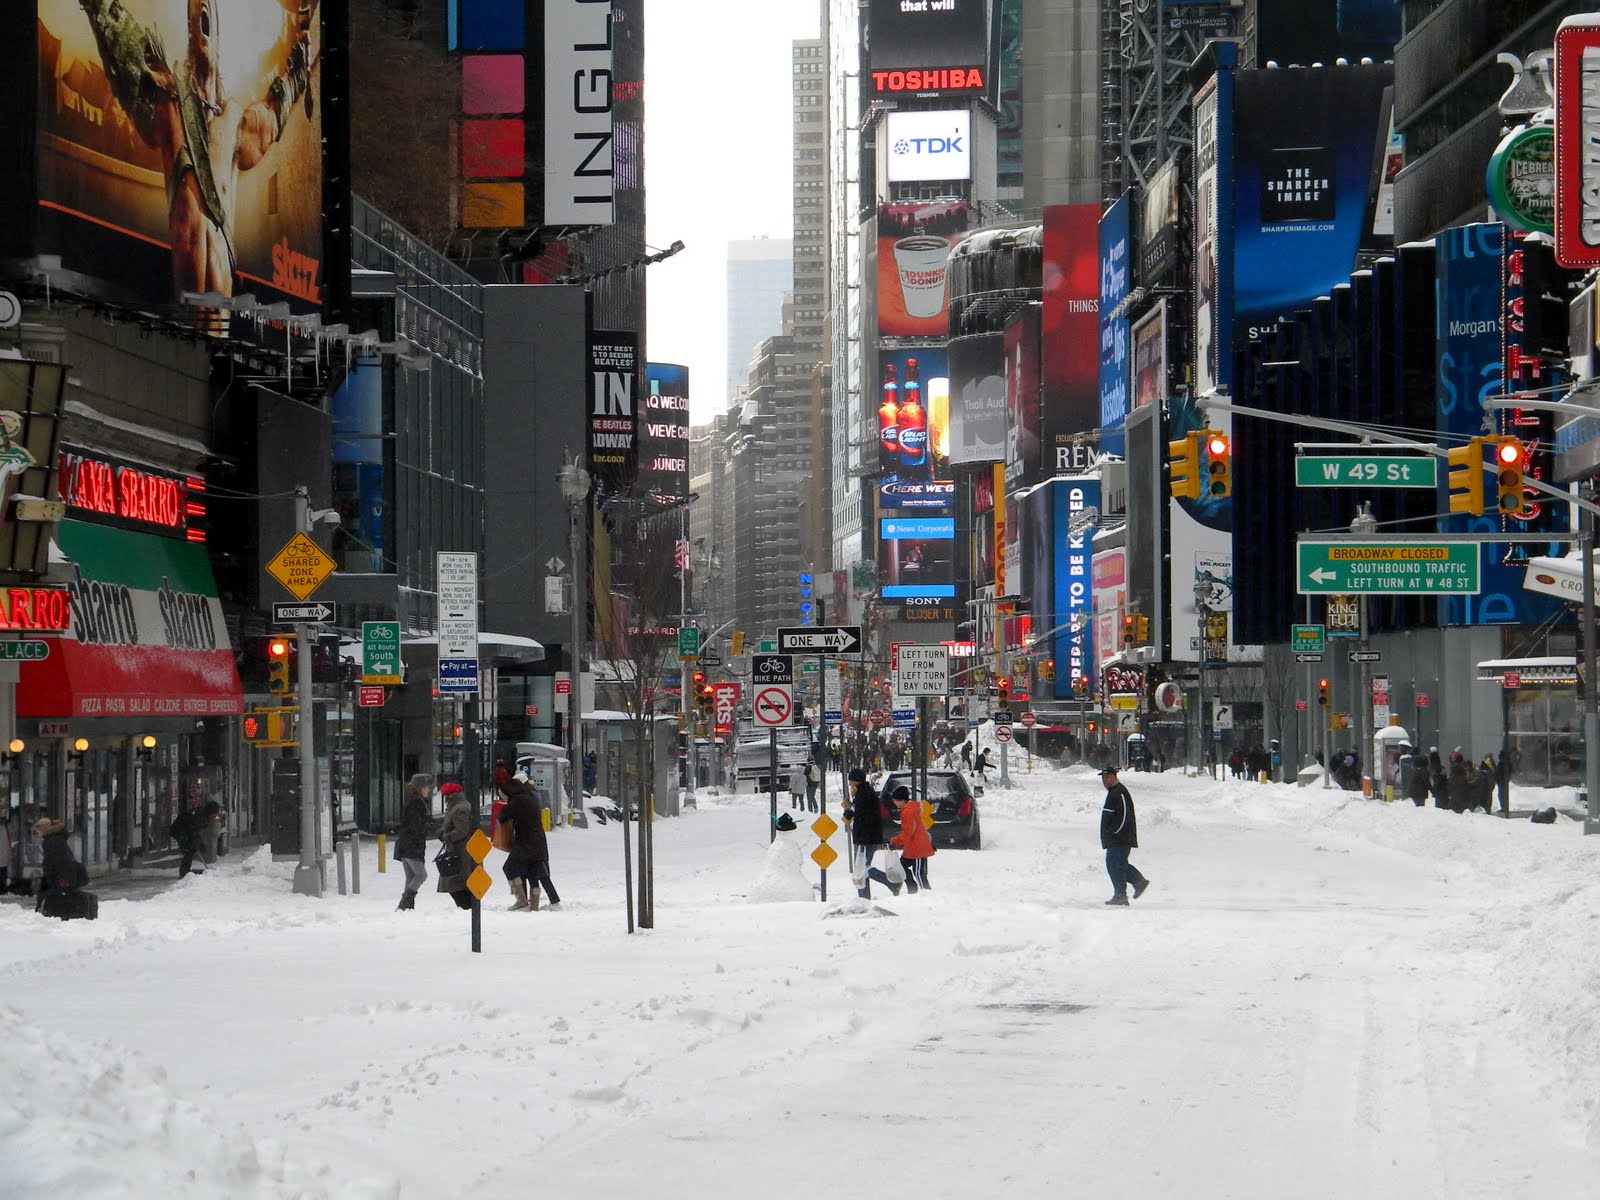 Public Domain Clip Art Photo And Image: Winter Snow Storm New York City 12 26 10 Times Square